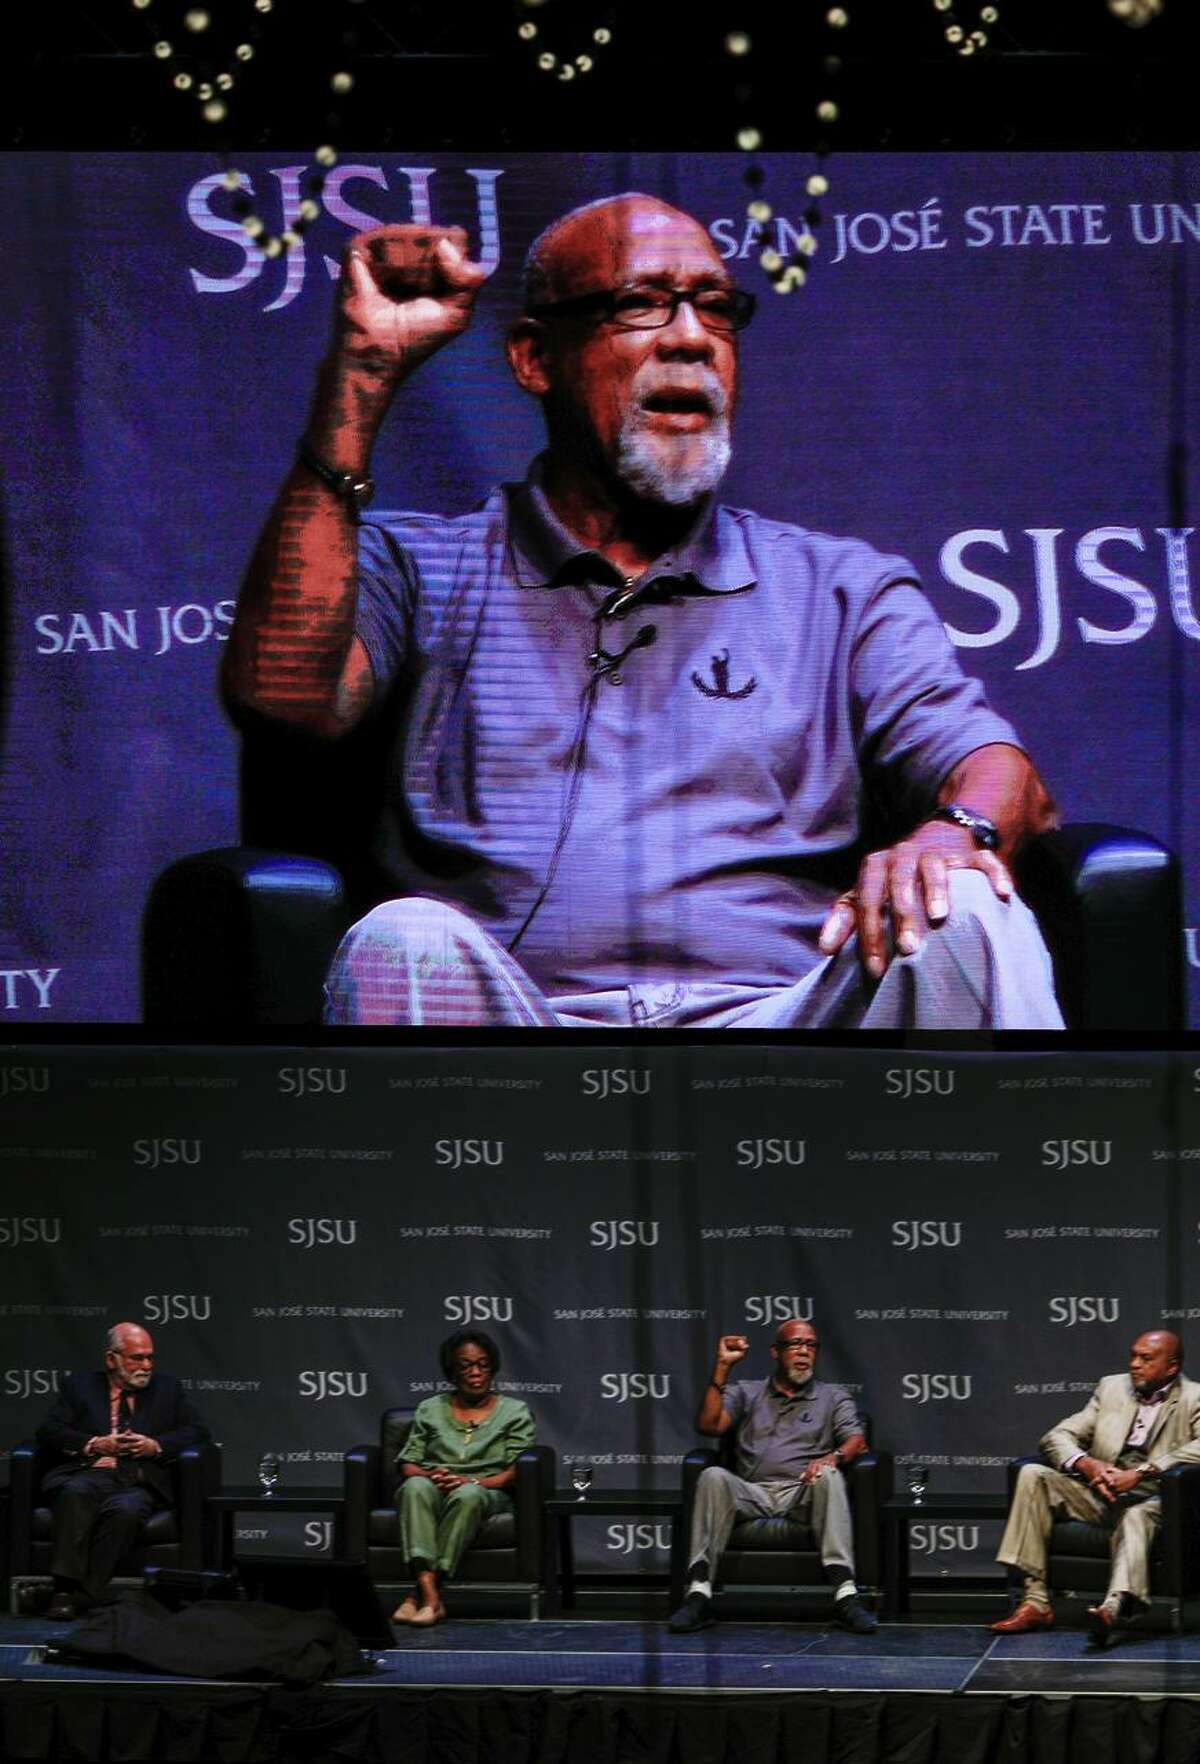 Joint caption: LEFT: 1968 Olympic athlete Juan Carlos (center) speaks about his experience during the Mexico City Olympics in the Words to Action panel at San Jose State University in San Jose, California, on Wednesday, Oct. 17, 2018. RIGHT: FILE - In this Oct. 16, 1968 file photo, extending gloved hands skyward in a Black power salute as a form of racial protest, U.S. athletes Tommie Smith, center, and John Carlos stare downward during the playing of national anthem after Smith received the gold and Carlos the bronze for the 200 meter run at the Summer Olympic Games in Mexico City. While the games were marked by dissent, today's situation in Mexico is much more chaotic with a government that is barely in control of many aspects of society, battered by violent drug cartels that are often supported by rogue cops and mayors. (AP Photo, File)